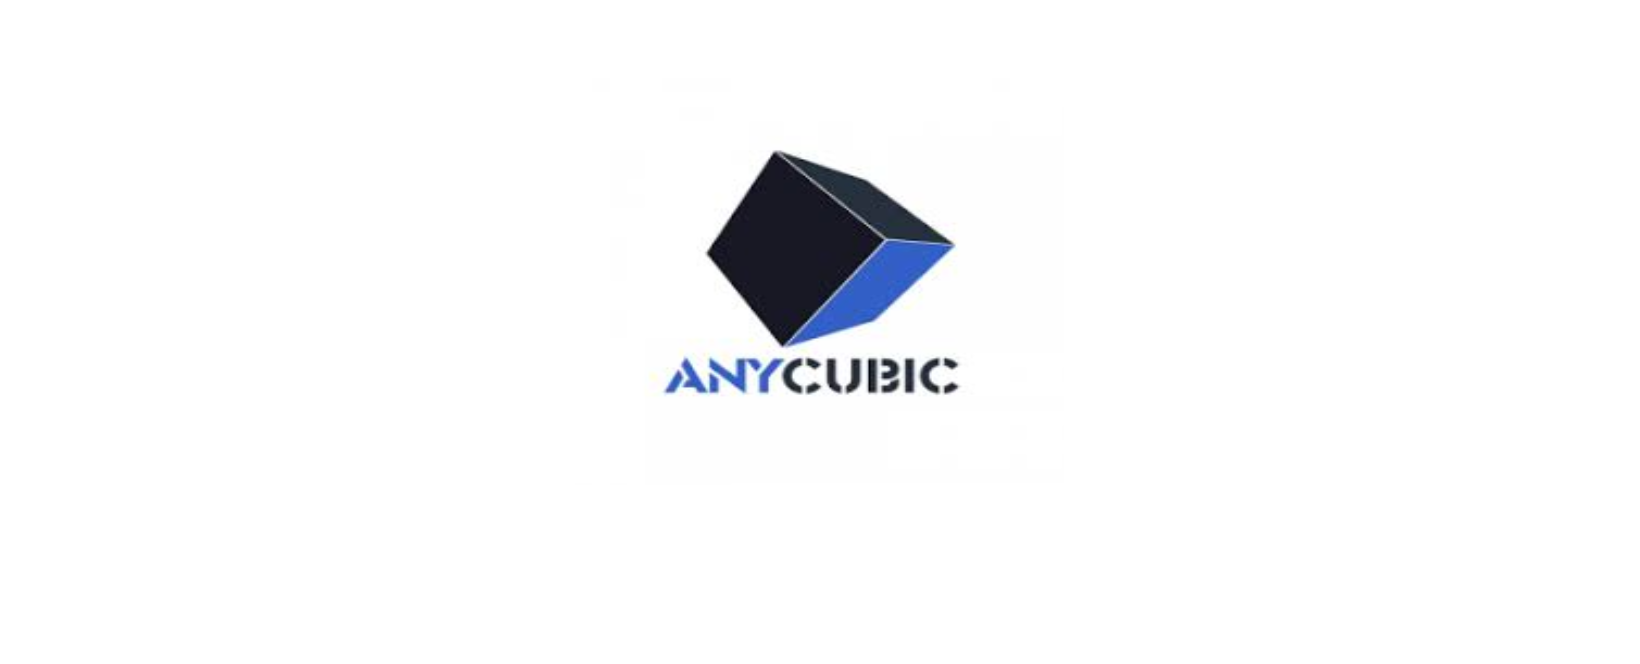 Anycubic Discount Code 2022